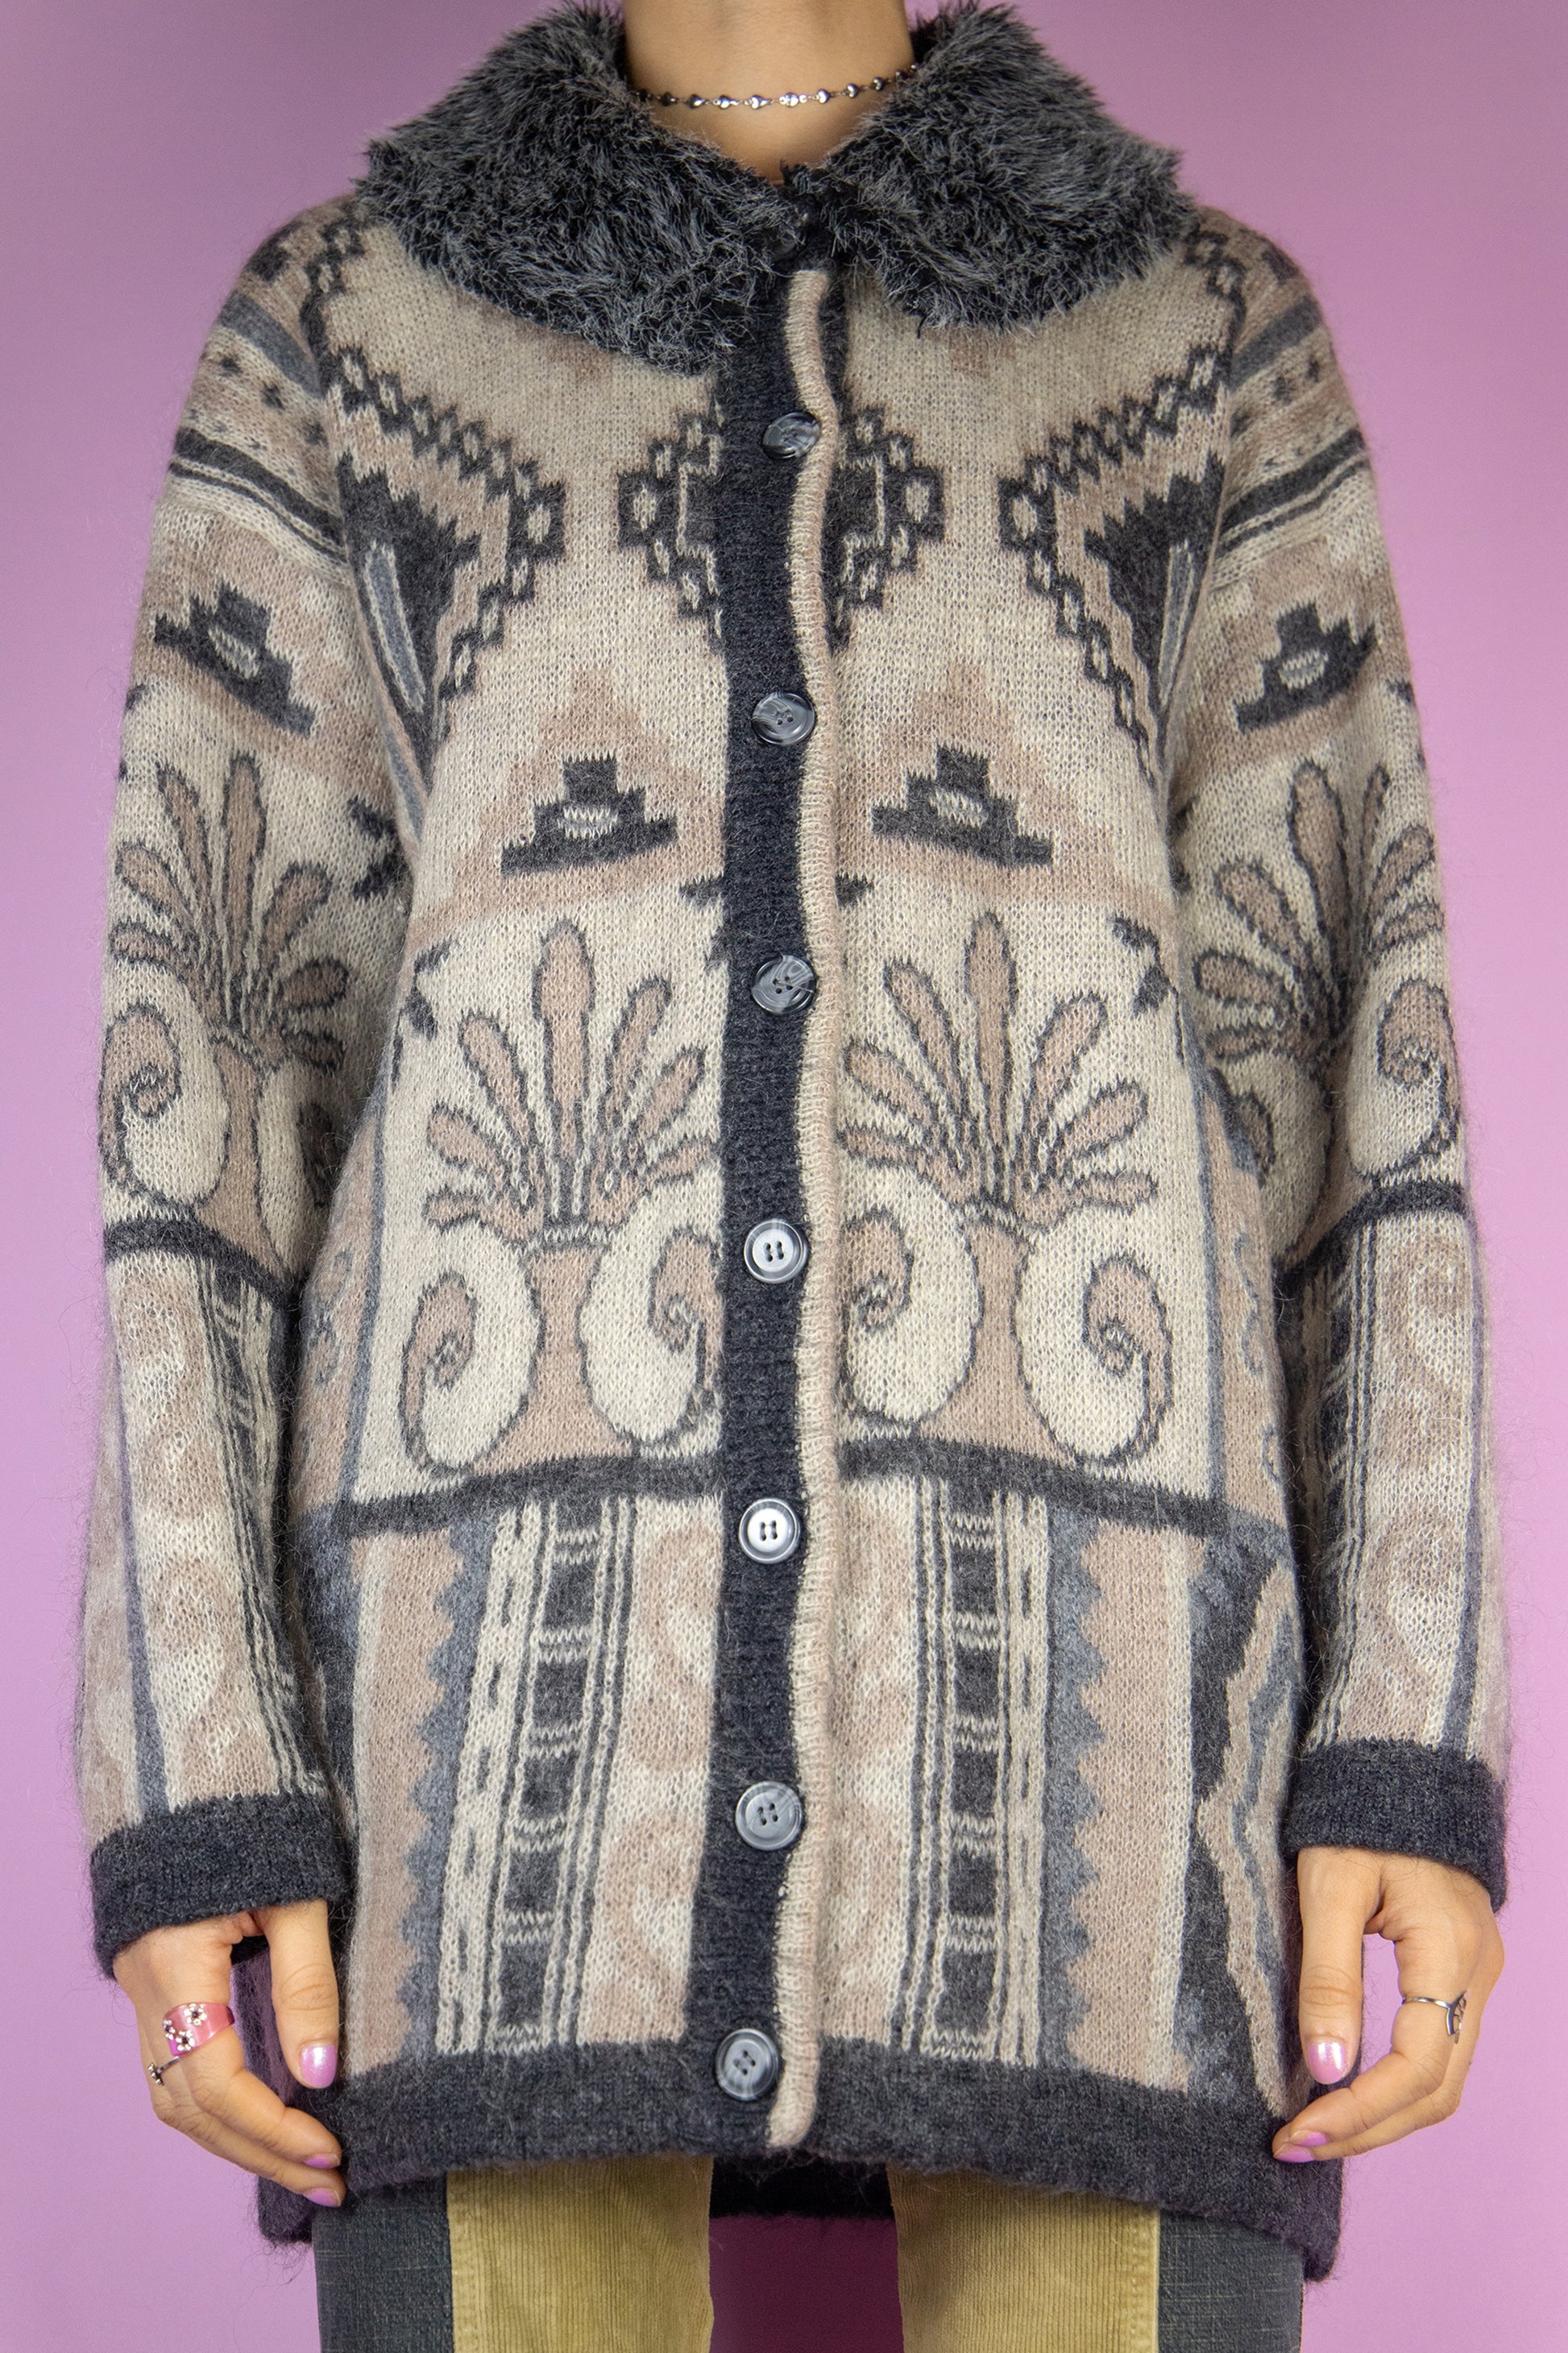 The Vintage 90s Faux Fur Cardigan is a gray and beige abstract pattern long cardigan made from a mohair blend with buttons and a faux fur collar. Looks cute when worn oversized. Lovely boho retro 1990s oversized sweater.